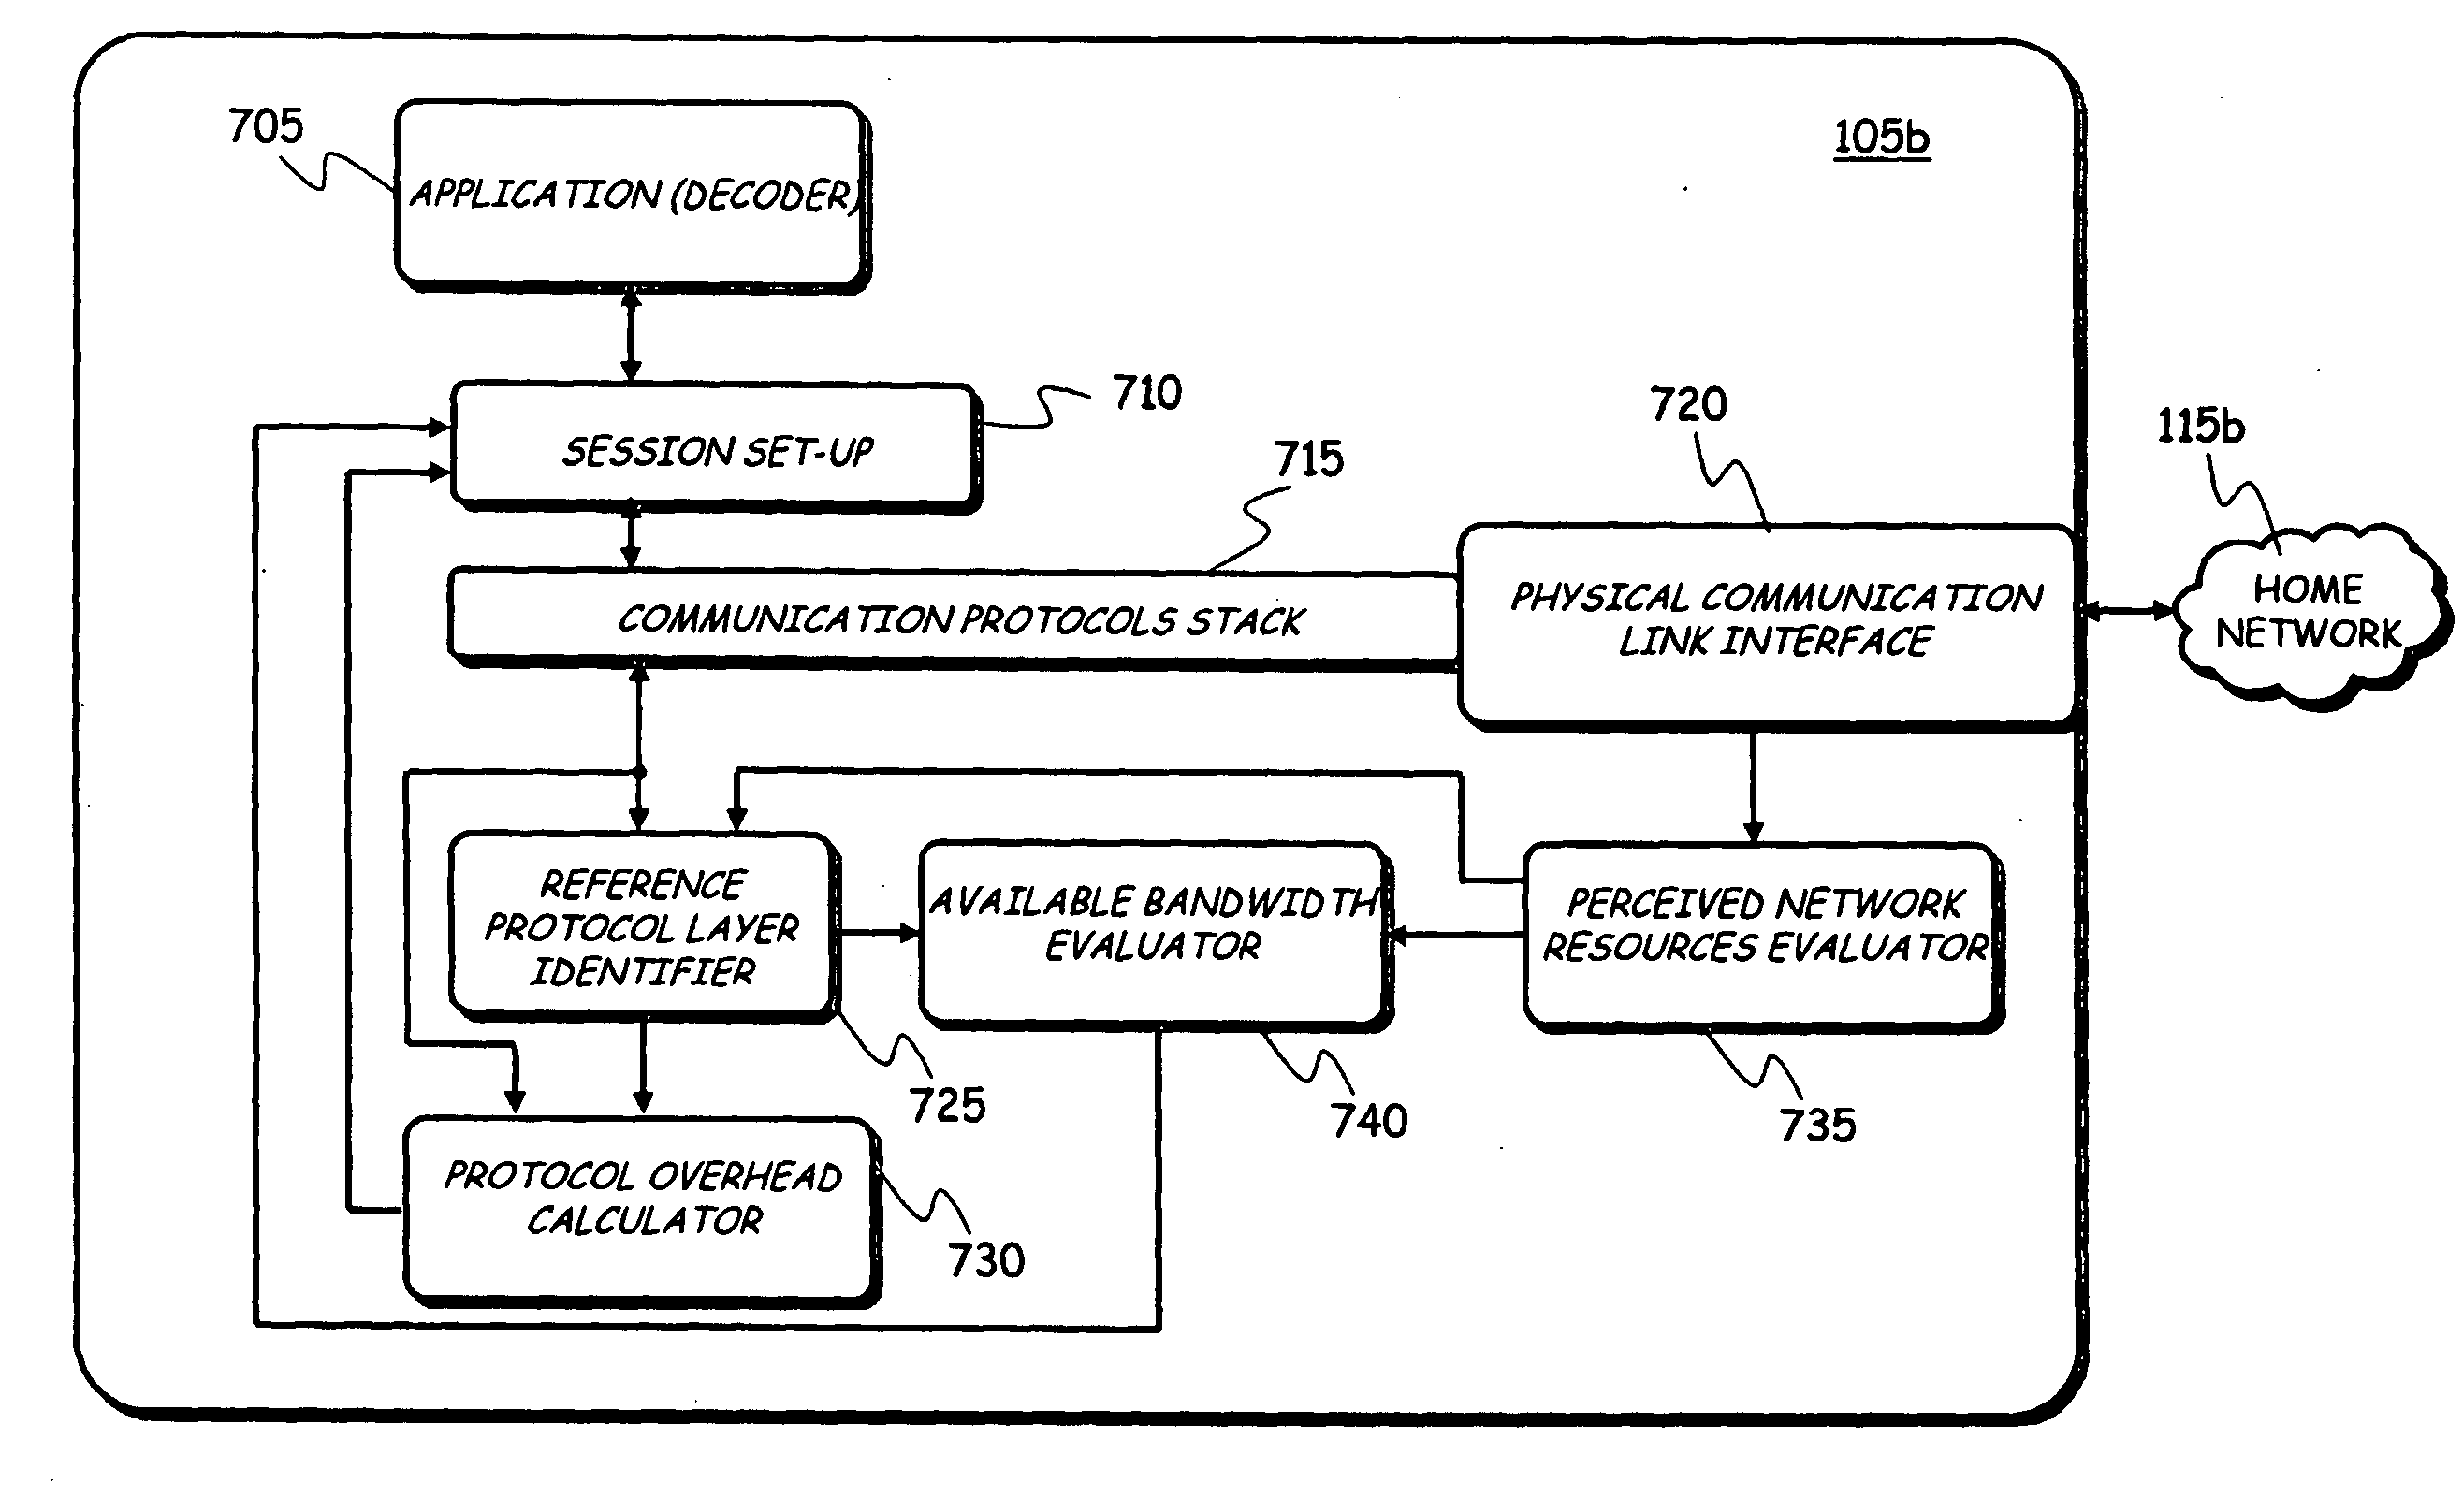 Method and apparatus for improving bandwith exploitation in real-time audio/video communications